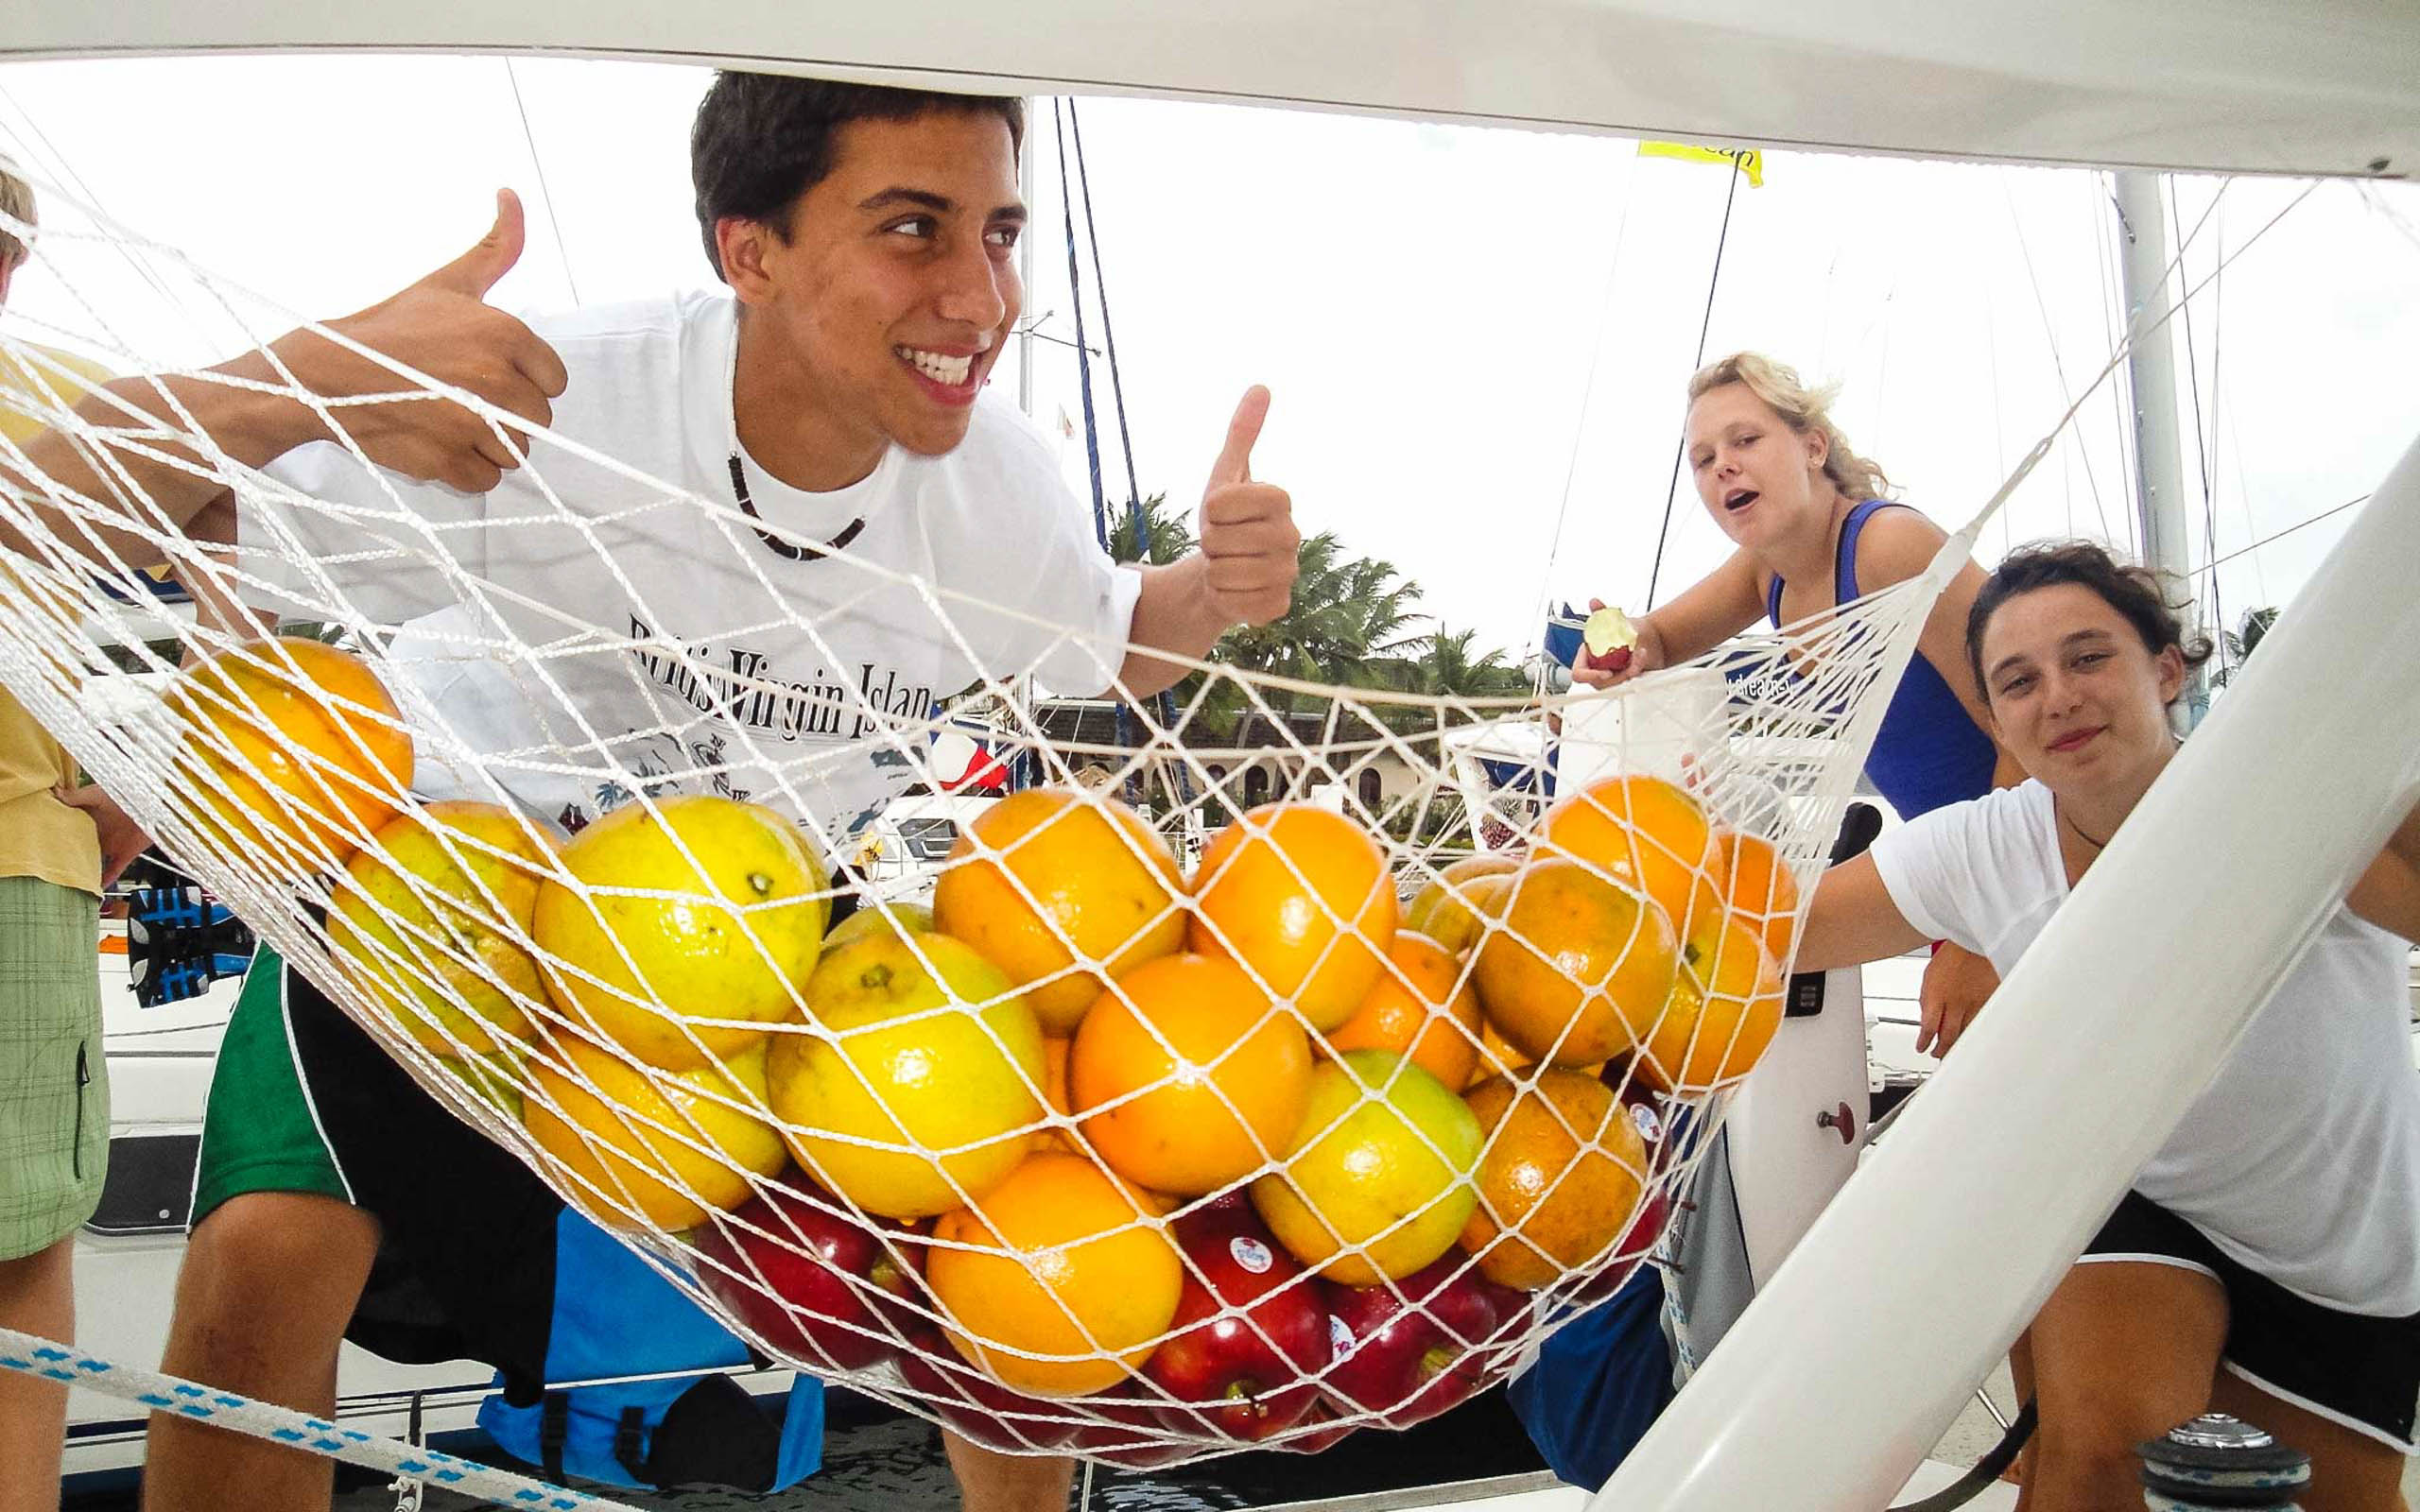 A group of people on a sailboat with oranges in a net.